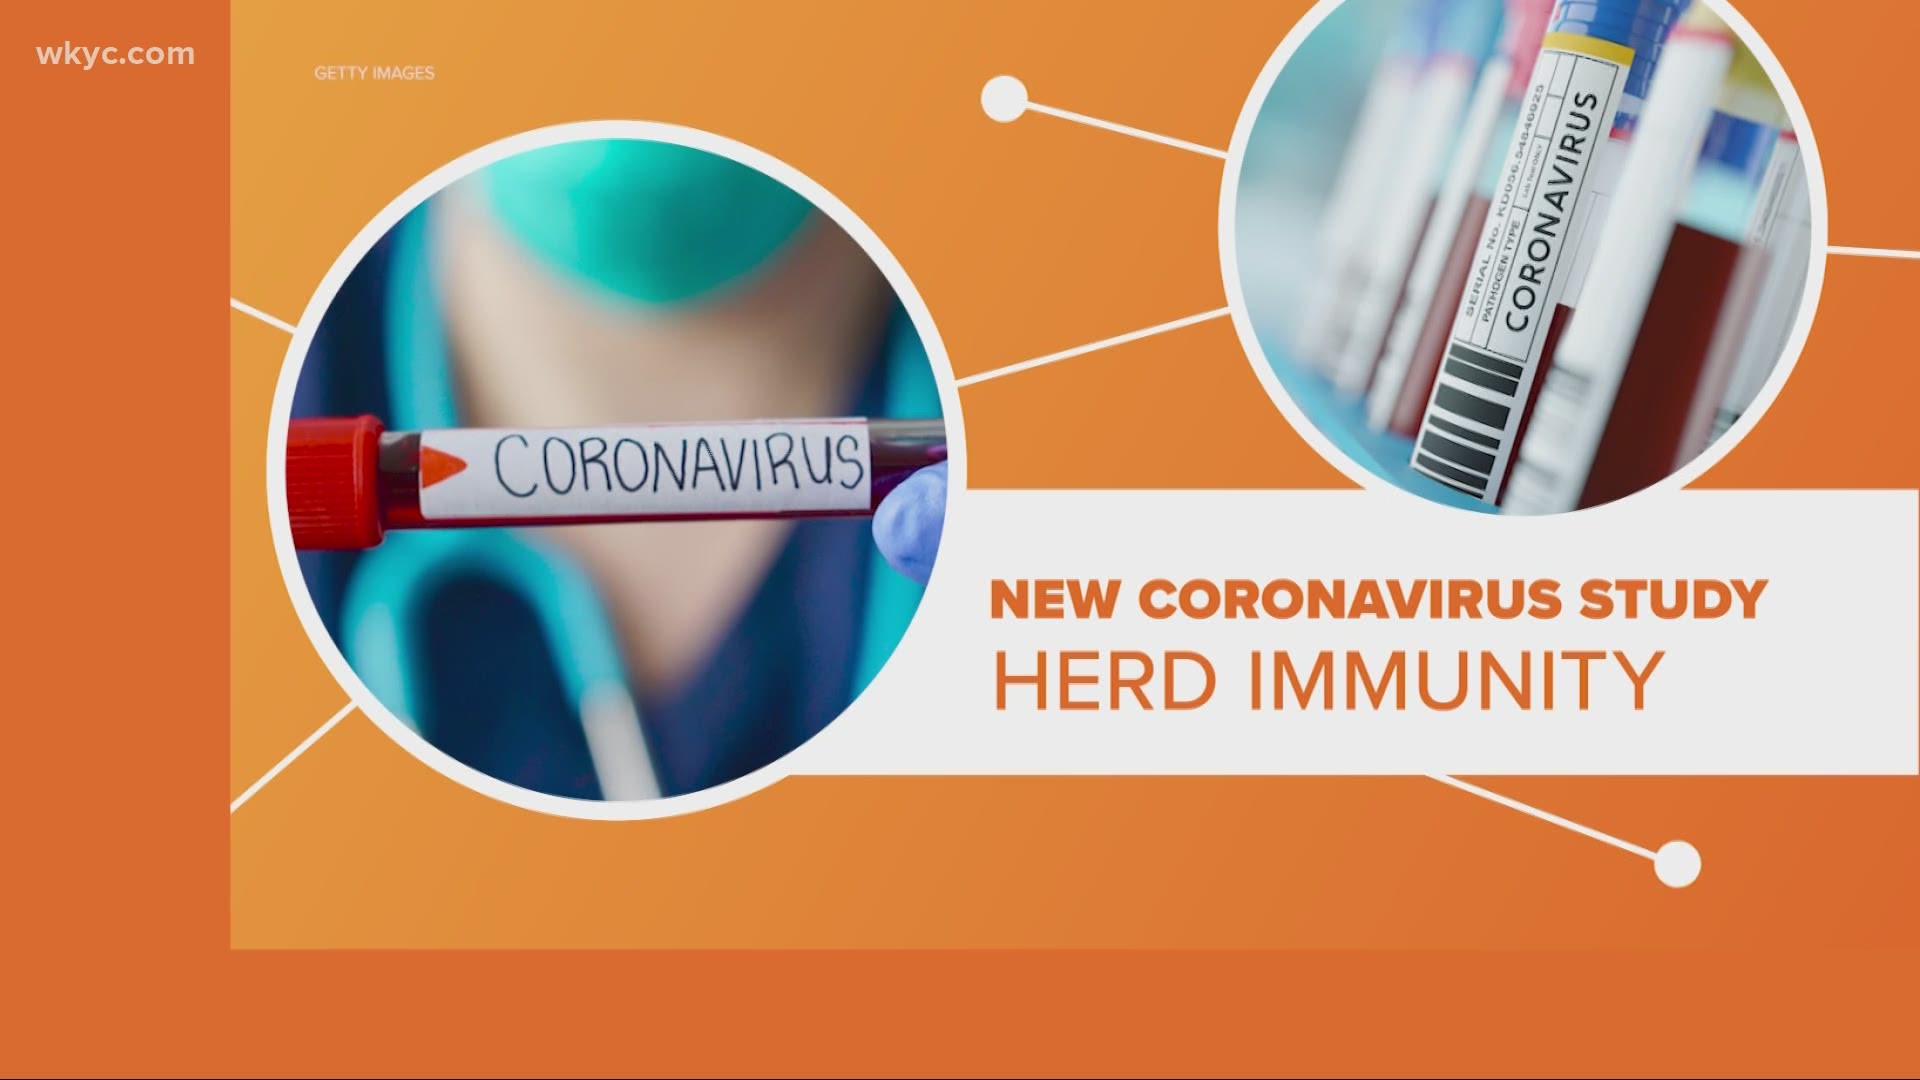 Will herd immunity happen naturally to beat coronavirus? Here's what experts are saying after a recent study concluded.